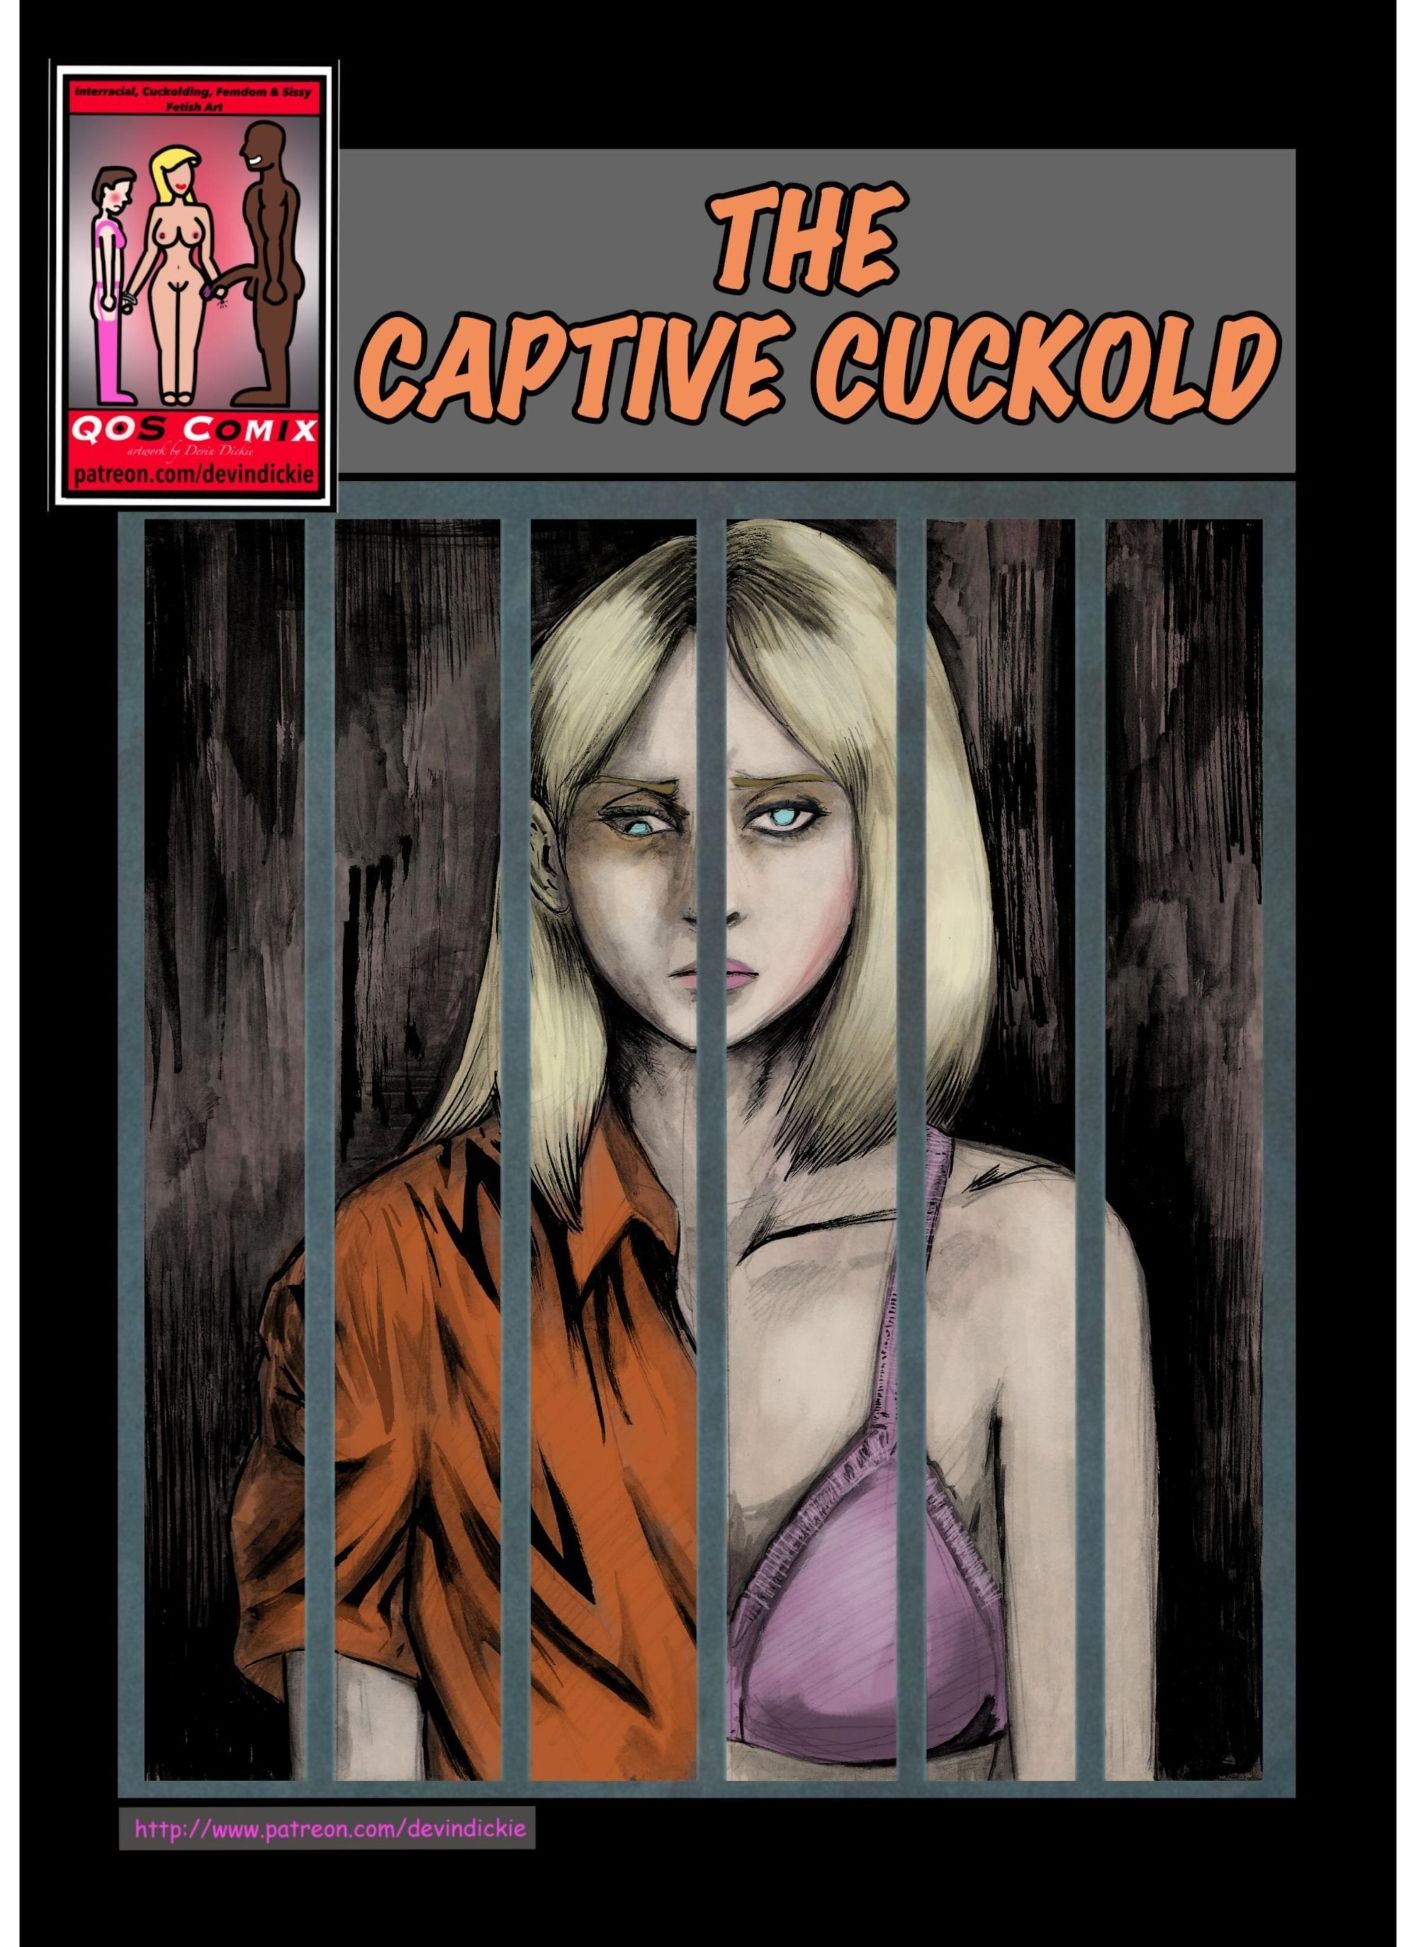 Captive Cuckold by Devin Dickie pic